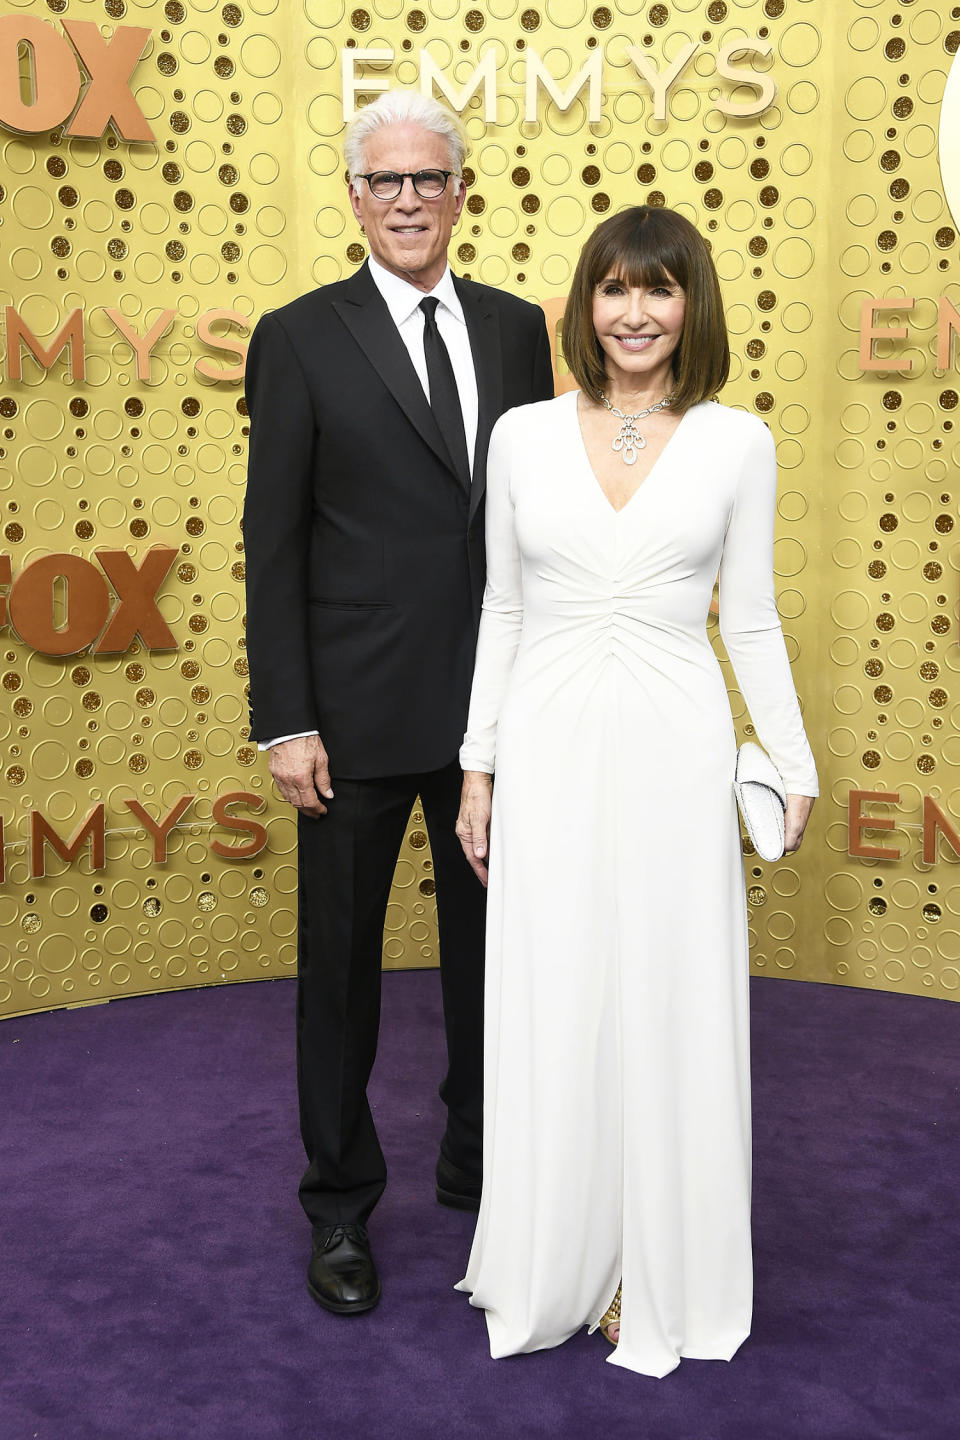 Ted Danson and Mary Steenburgen in 2019. (Frazer Harrison / Getty Images)